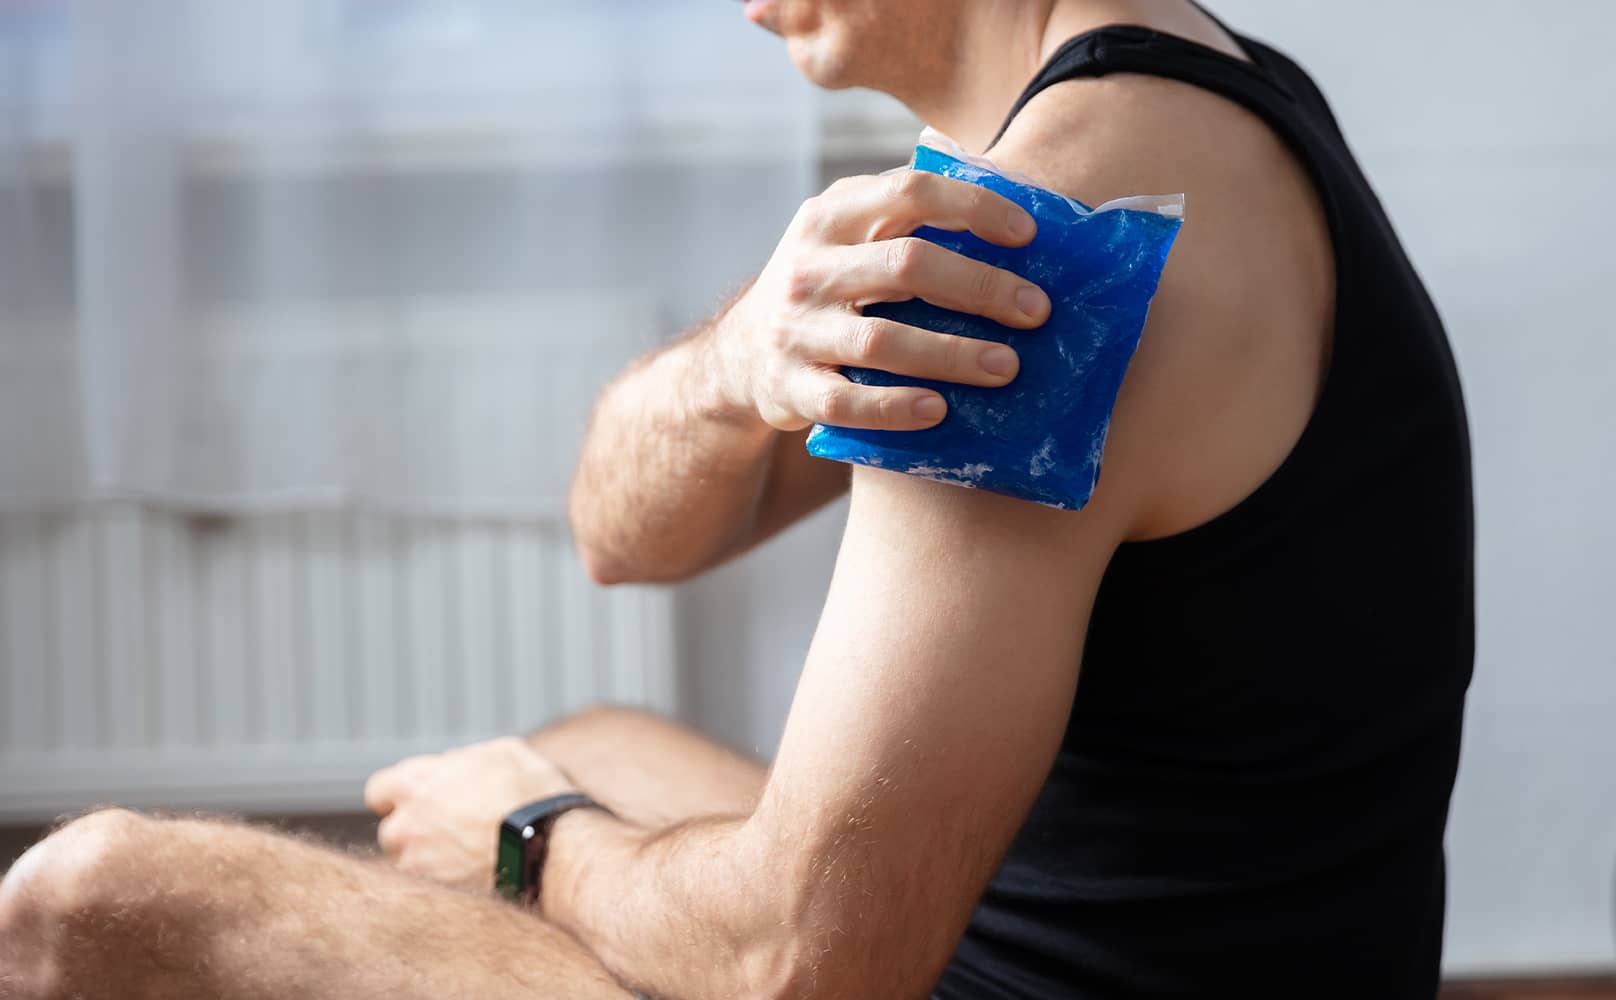 Shop for recovery support products, showing a man holding a gel pack to his upper arm